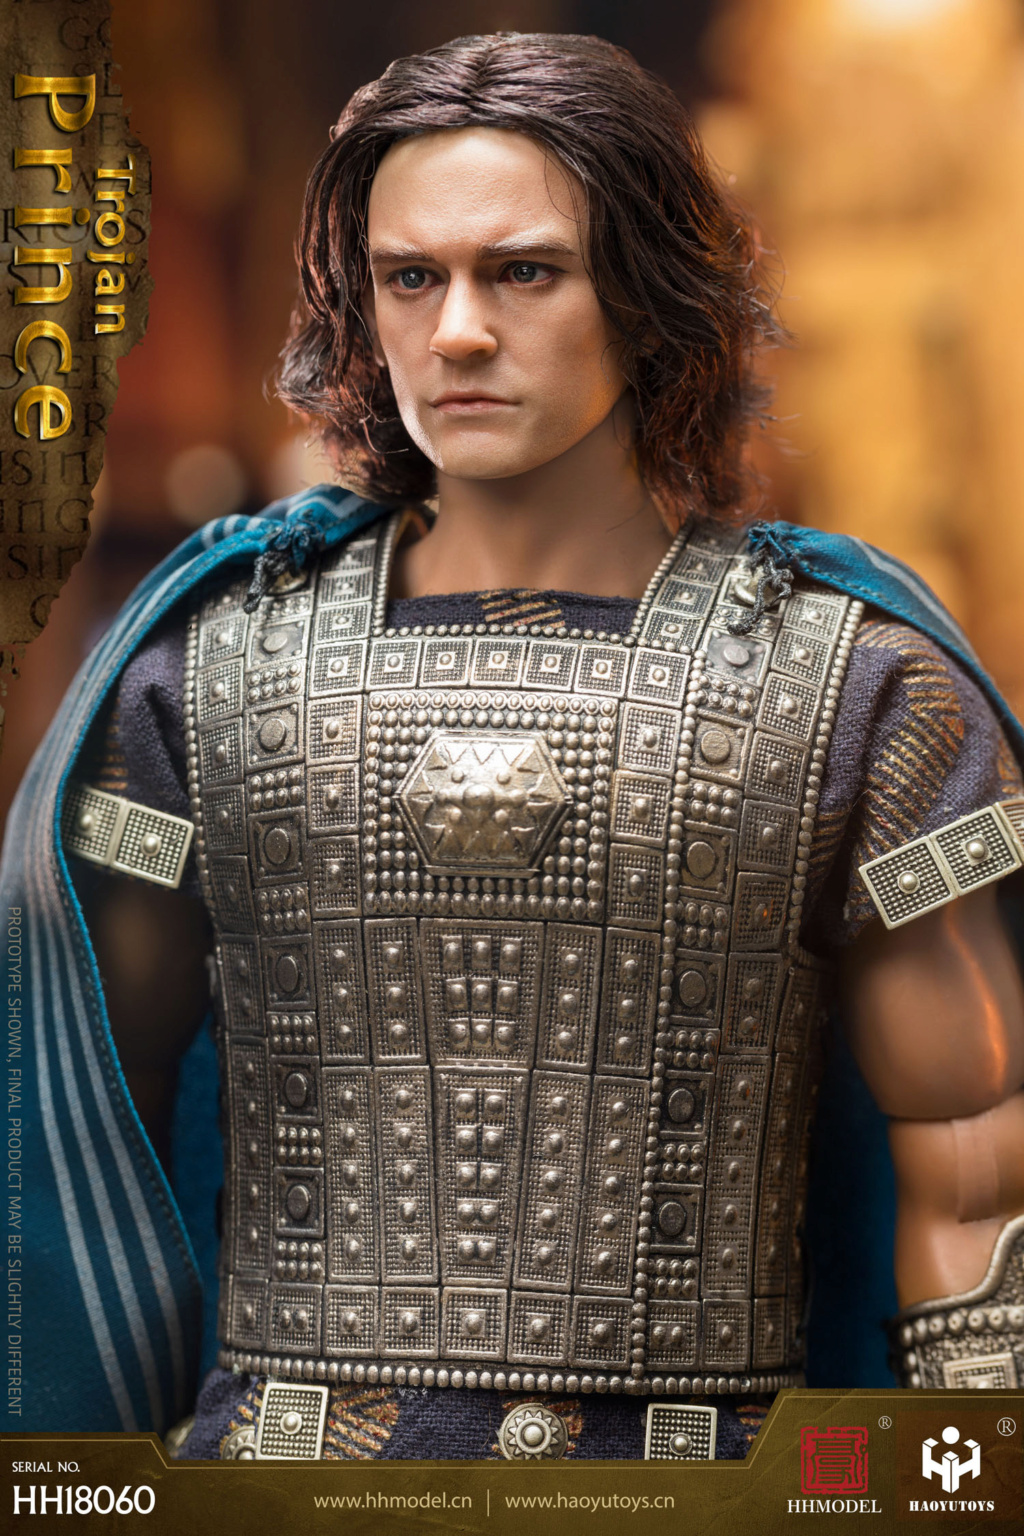 NEW PRODUCT: HHMODEL & HAOYUTOYS: 1/6 Empire Legion - Troy Prince Action Figure #HH18060 16280110